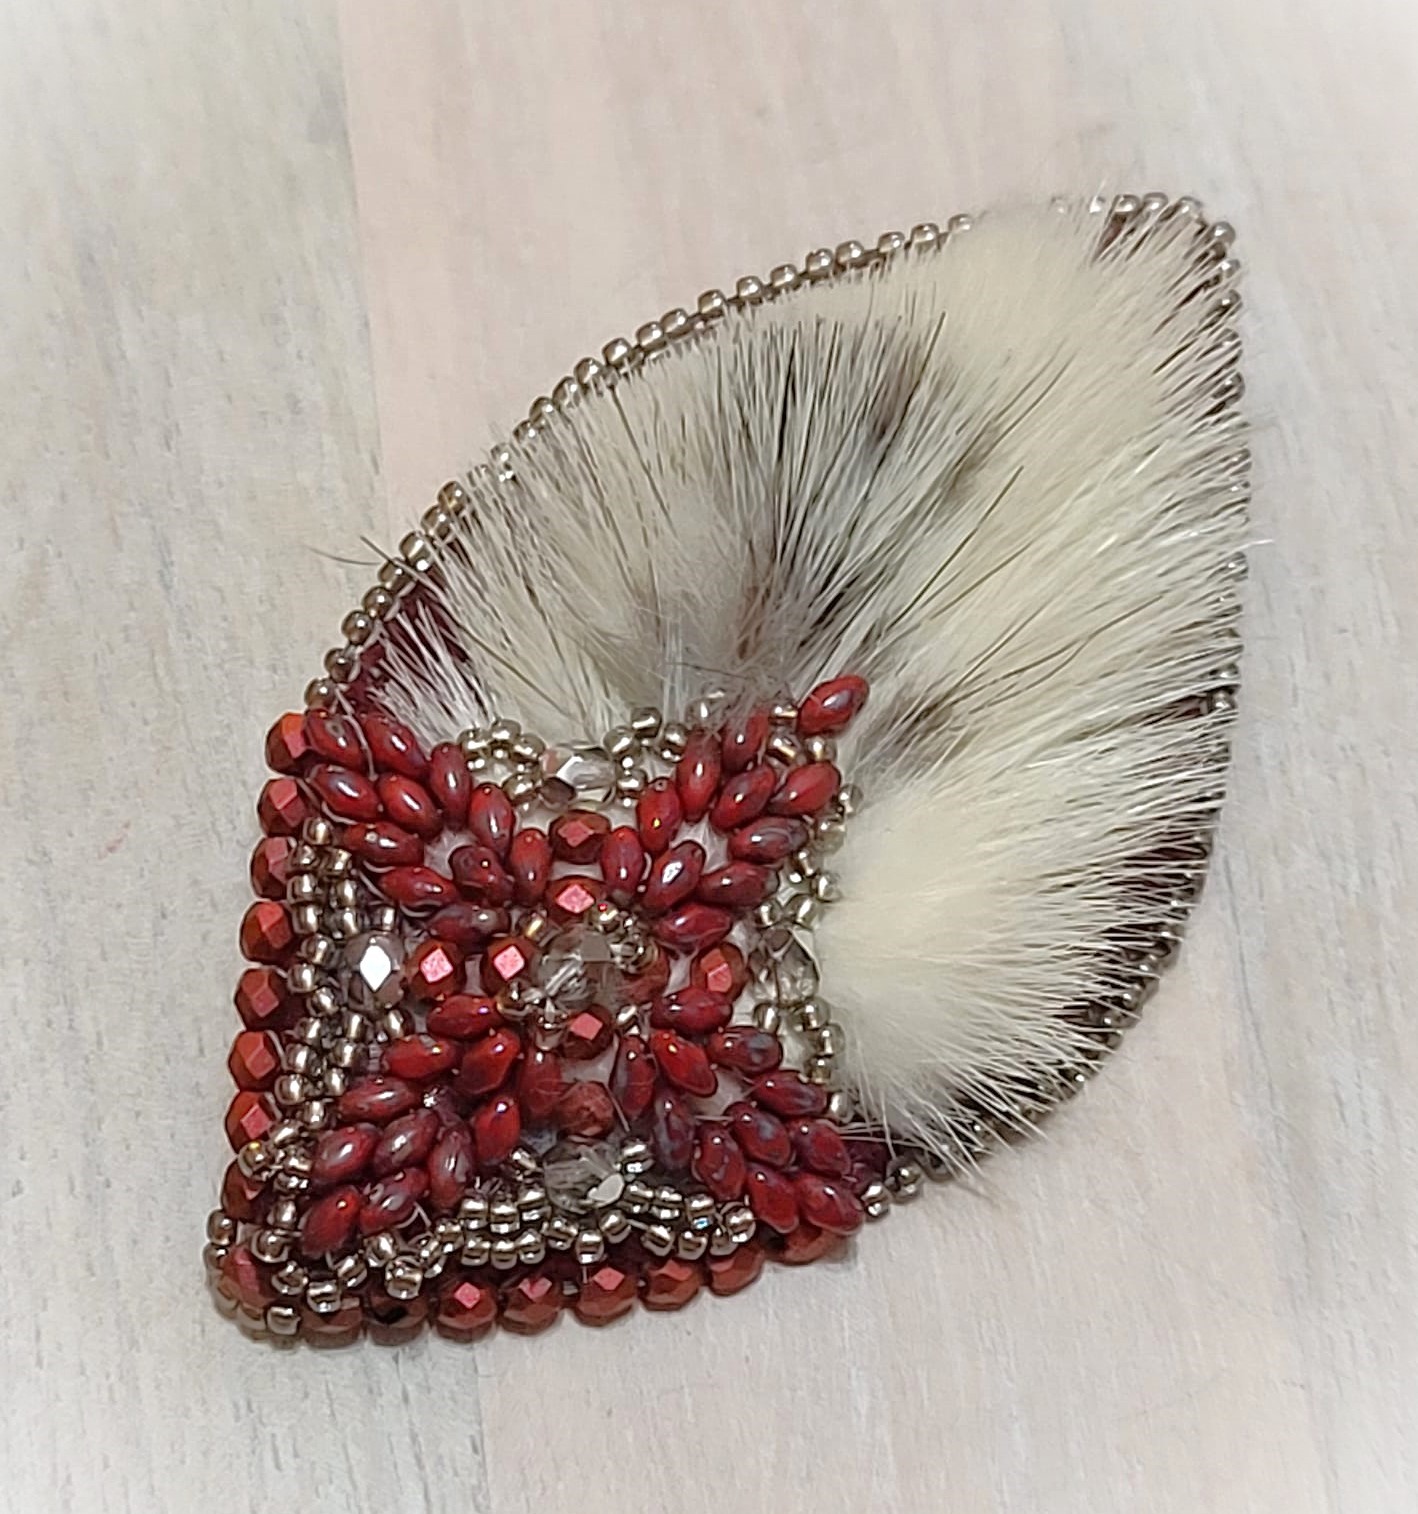 Bead and crystal pin, mink fur accents, handcrafted,